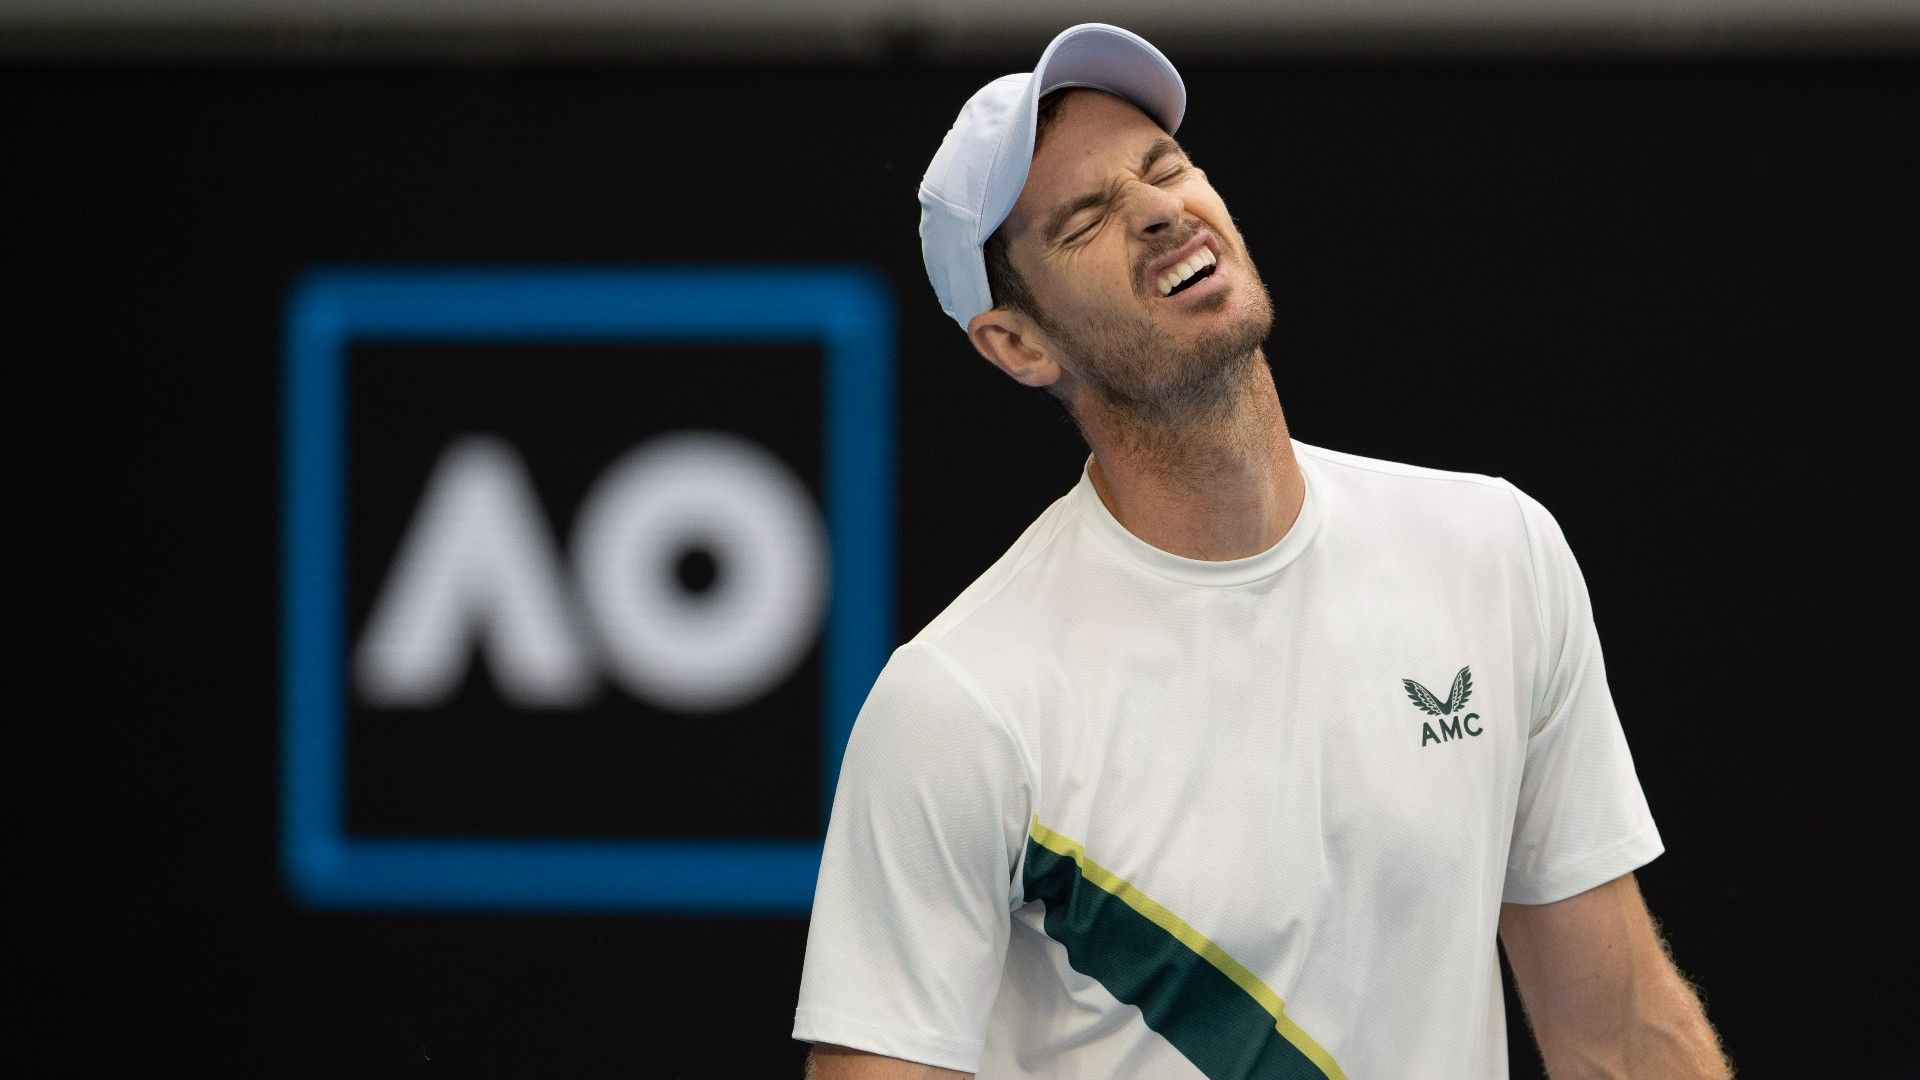 Andy Murray reveals moment with doctor who wrote him off, lays out brutal toll of Thanasi Kokkinakis epic